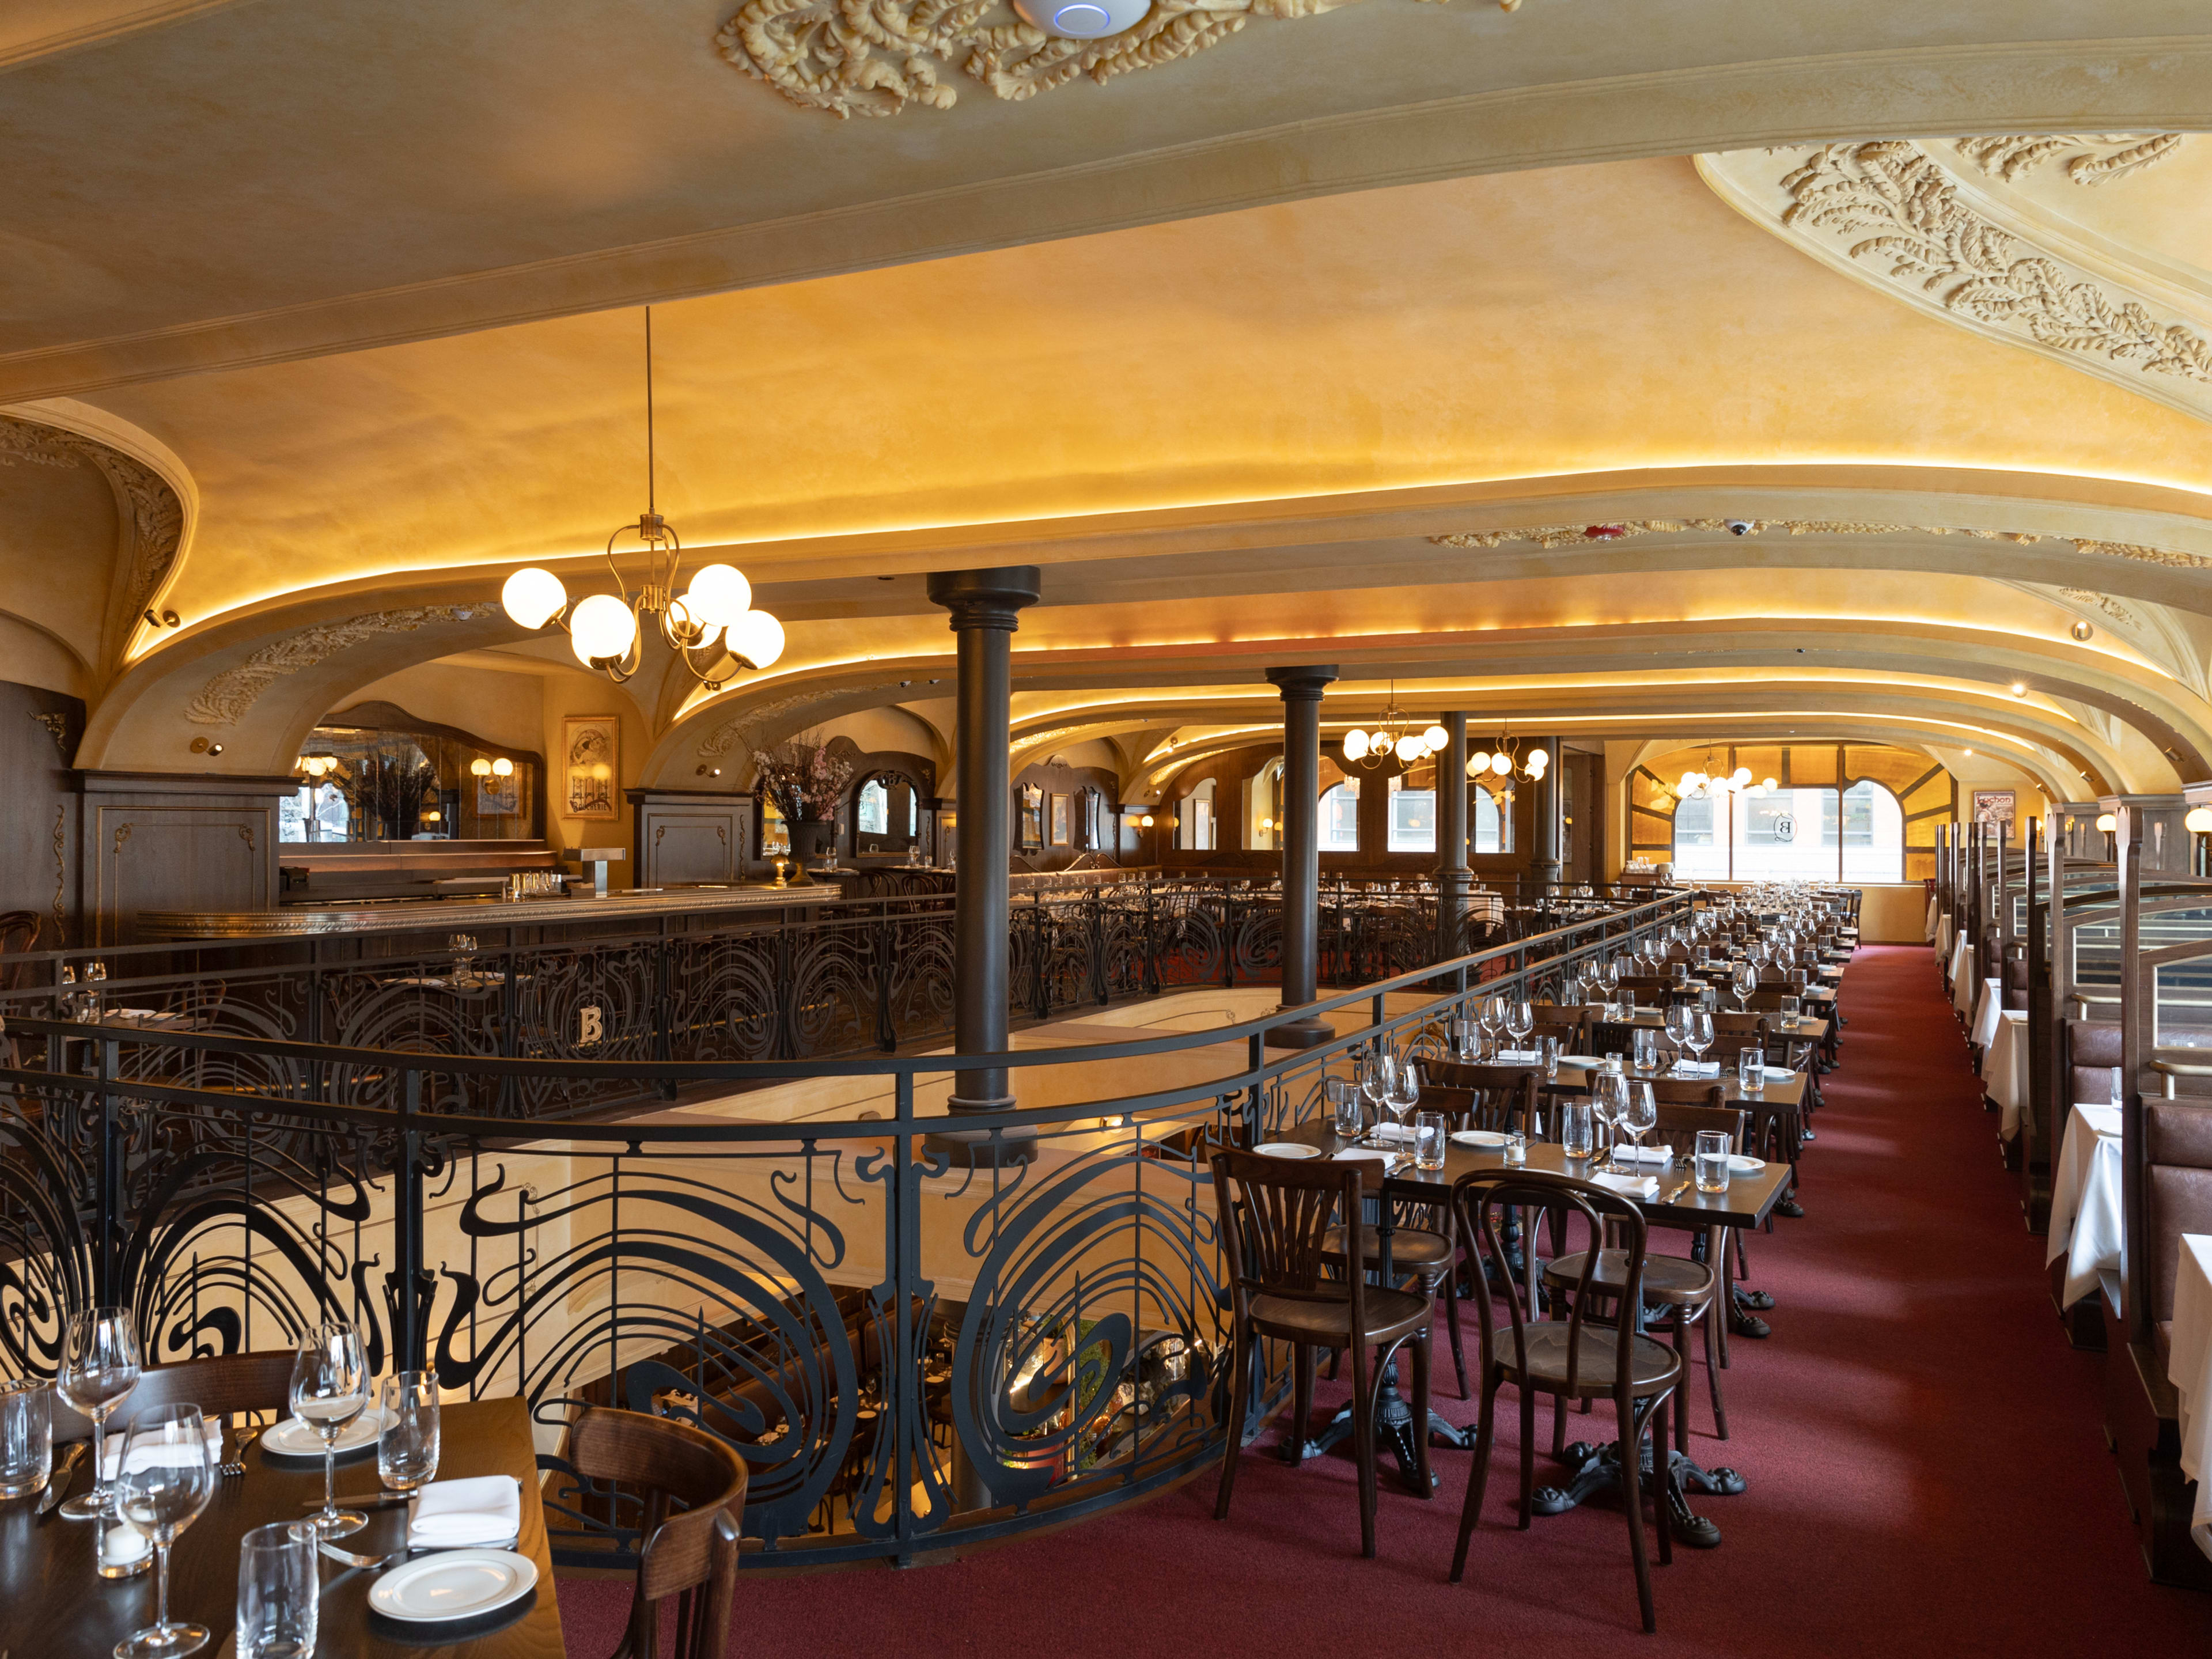 The second floor of a massive dinning room full of booths and tables next to a railing that looks into the first floor.